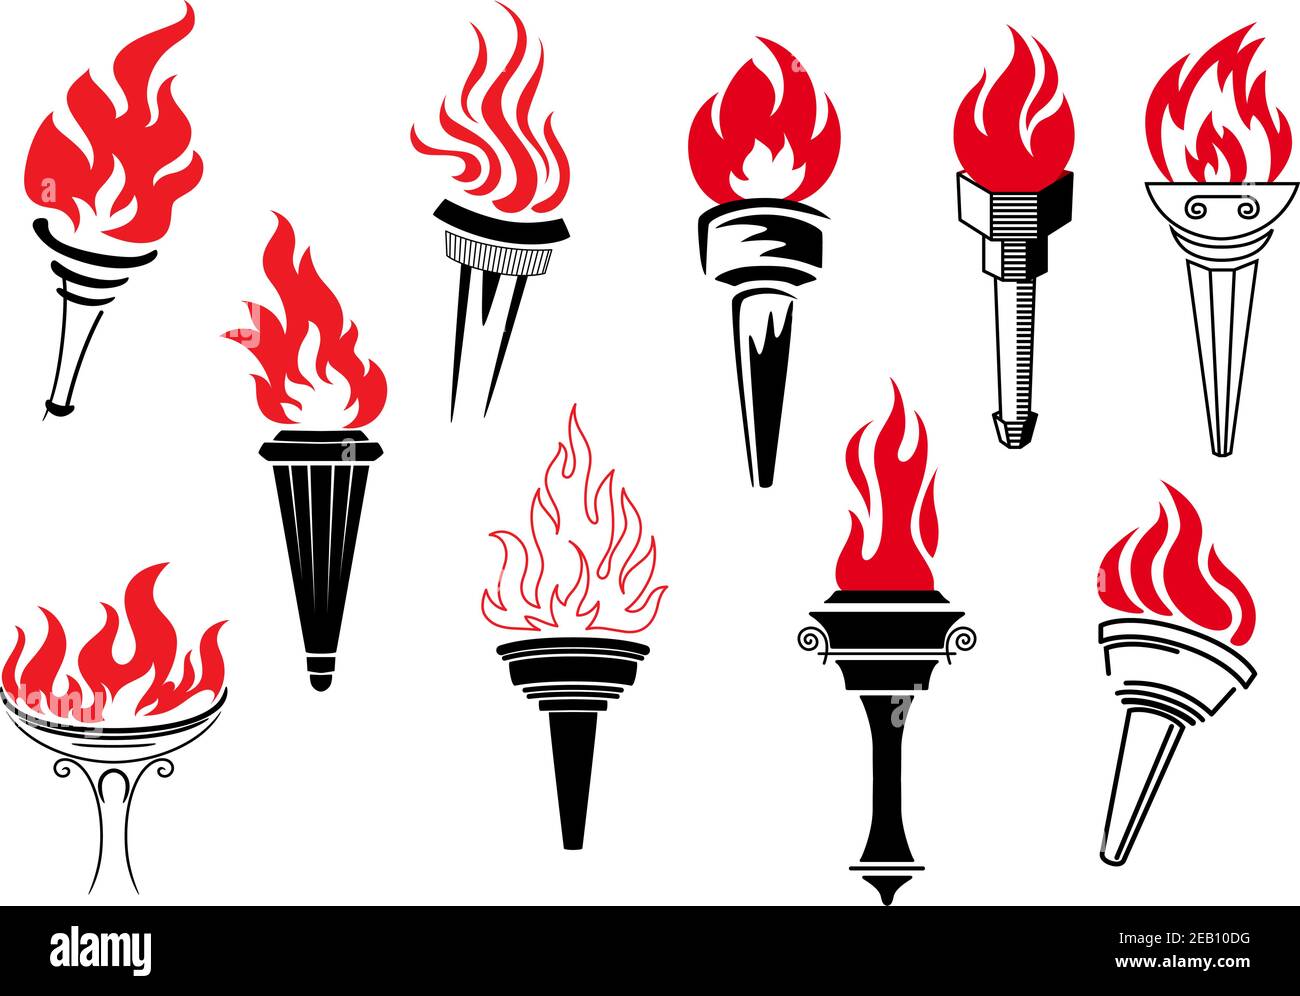 Vintage torches with burning flames for sports, logo or another heraldic design Stock Vector